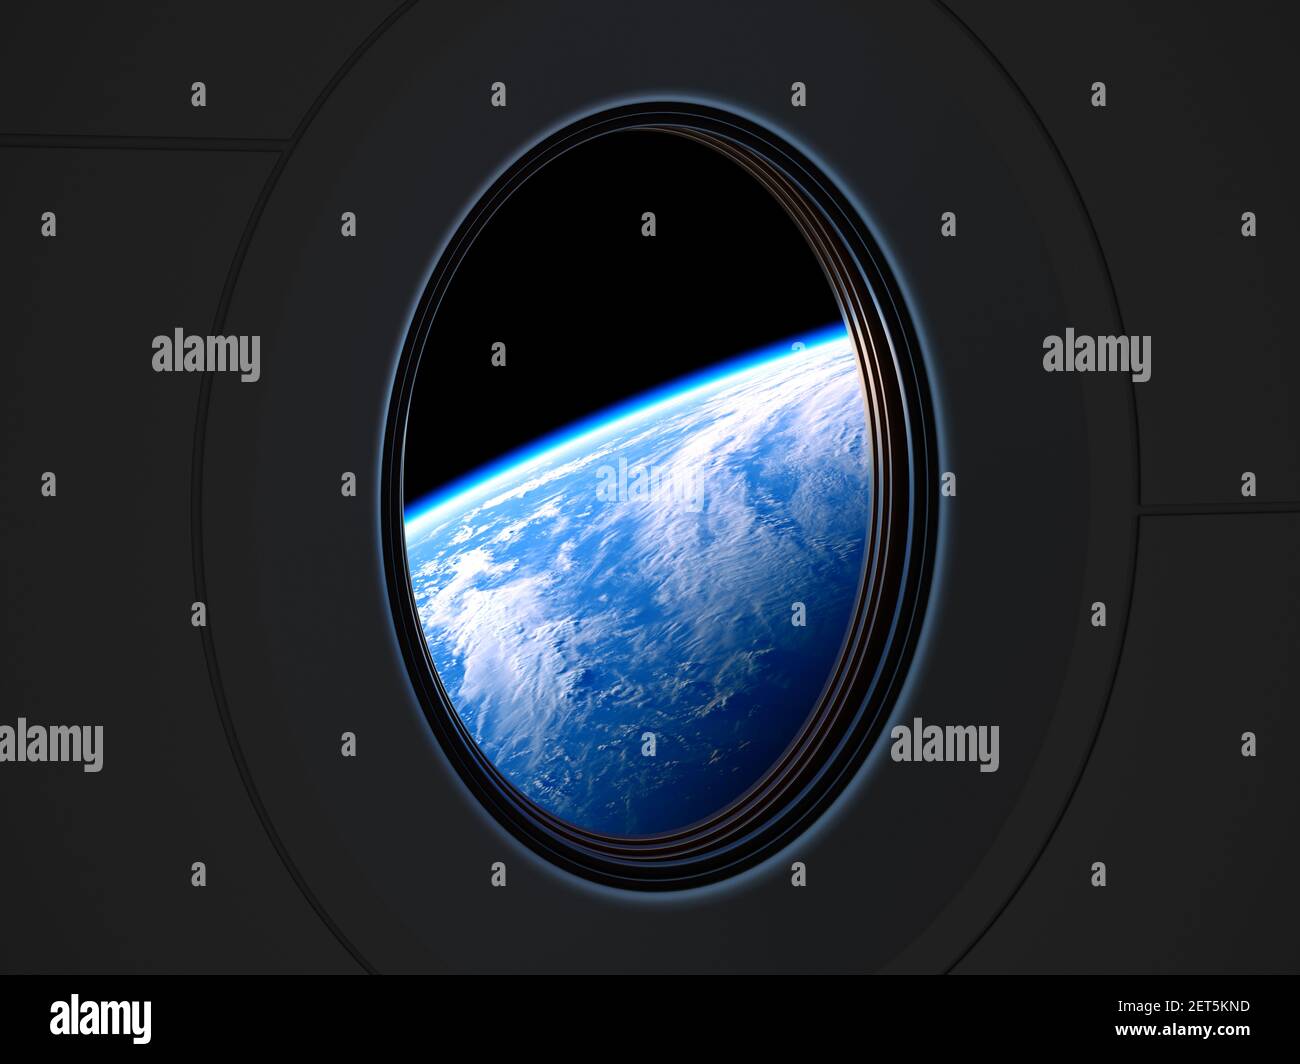 Amazing View Of Planet Earth From The Porthole Of A Private Spacecraft. 3D Illustration. Stock Photo